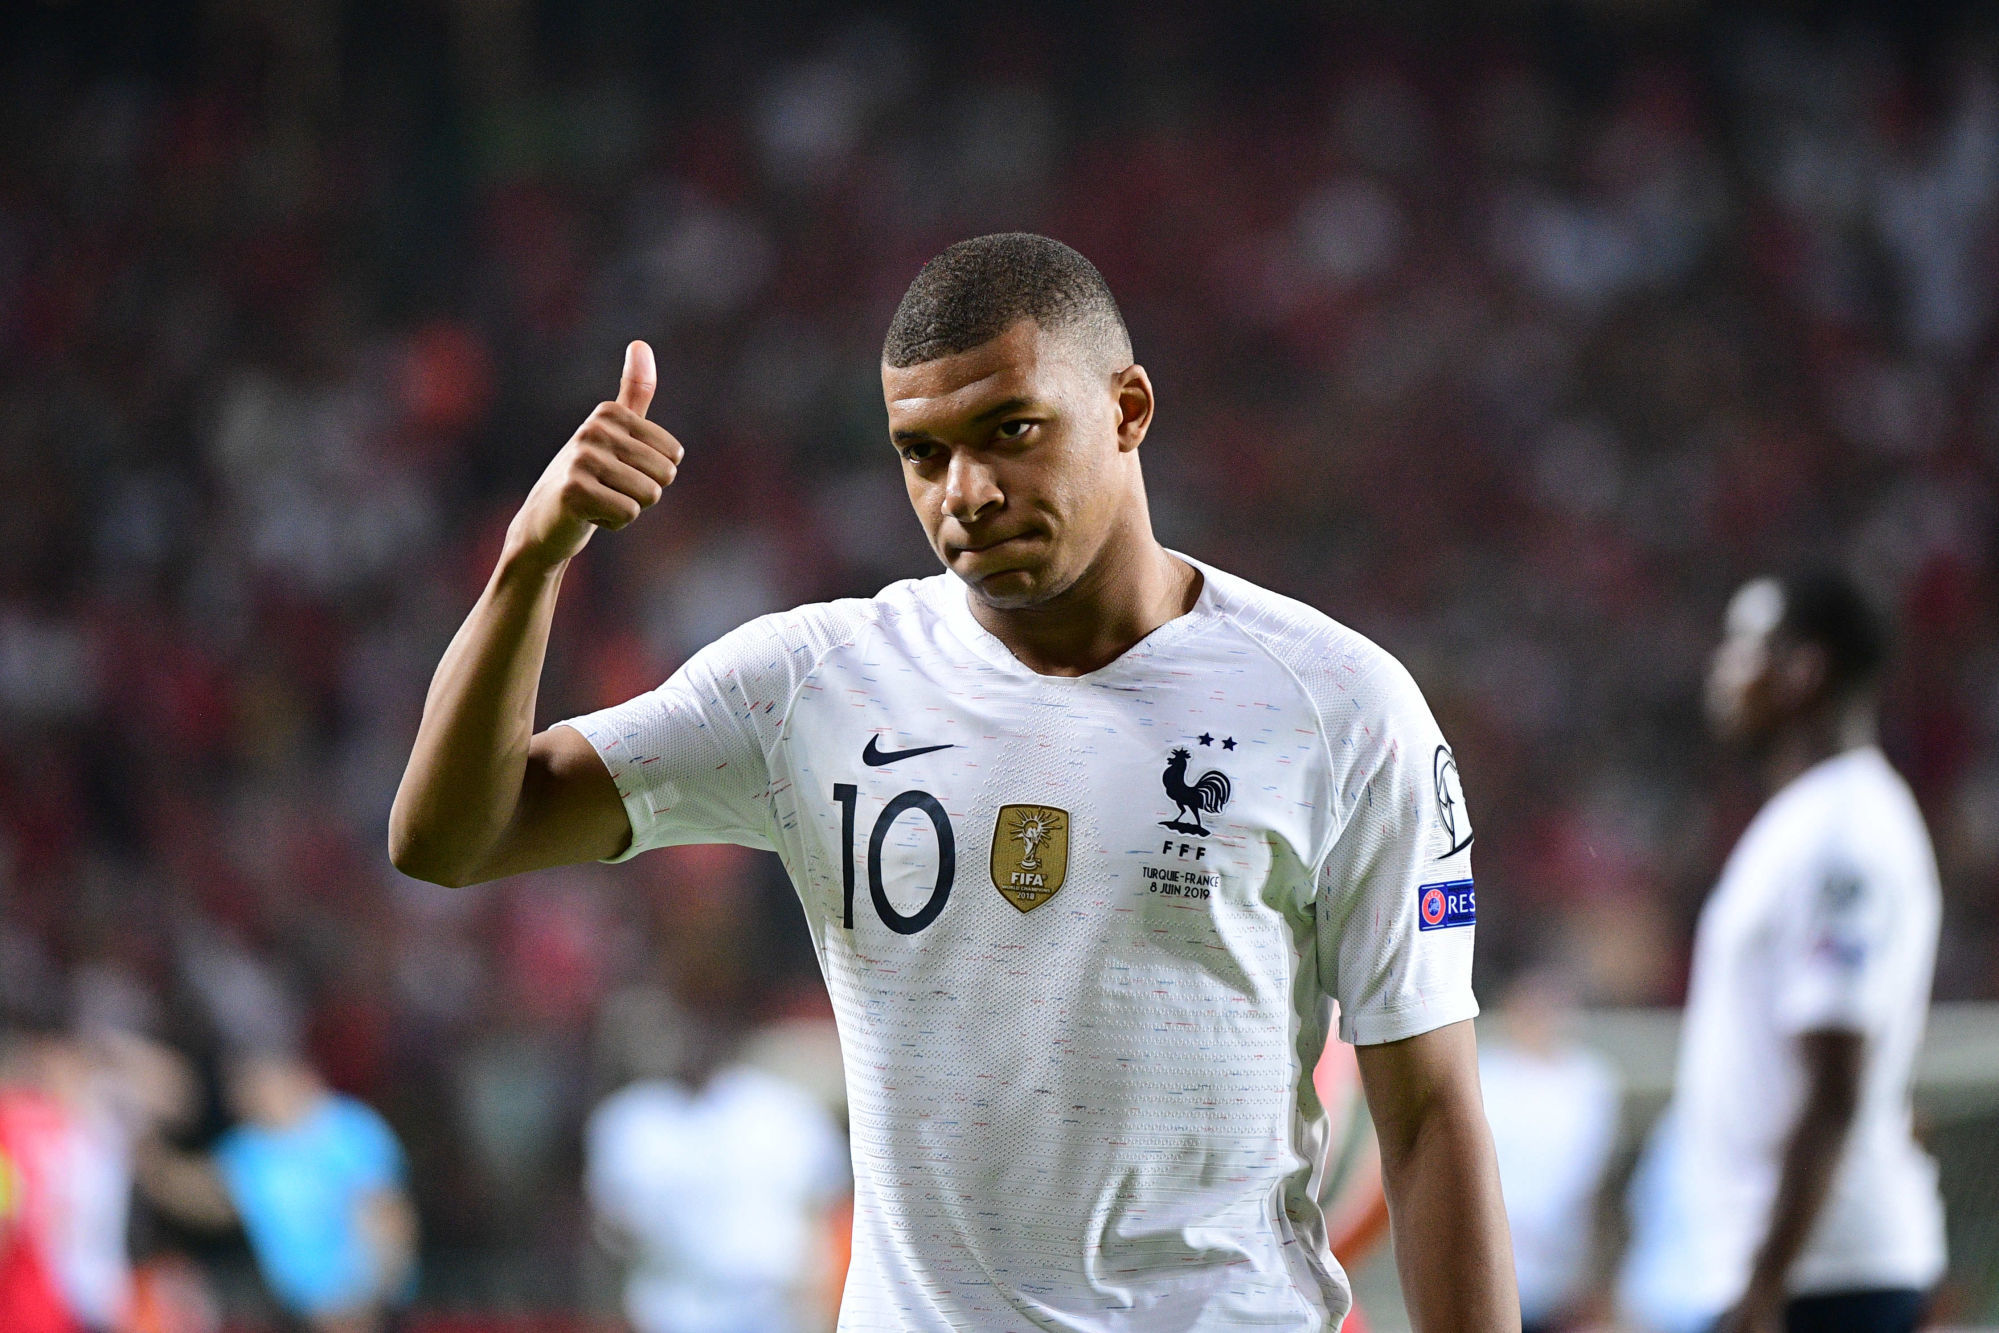 Kylian Mbappe of France during the Euro 2020 qualifying match between Turkey and France on June 8, 2019 in Konya, Turkey. (Photo by Dave Winter/Icon Sport)